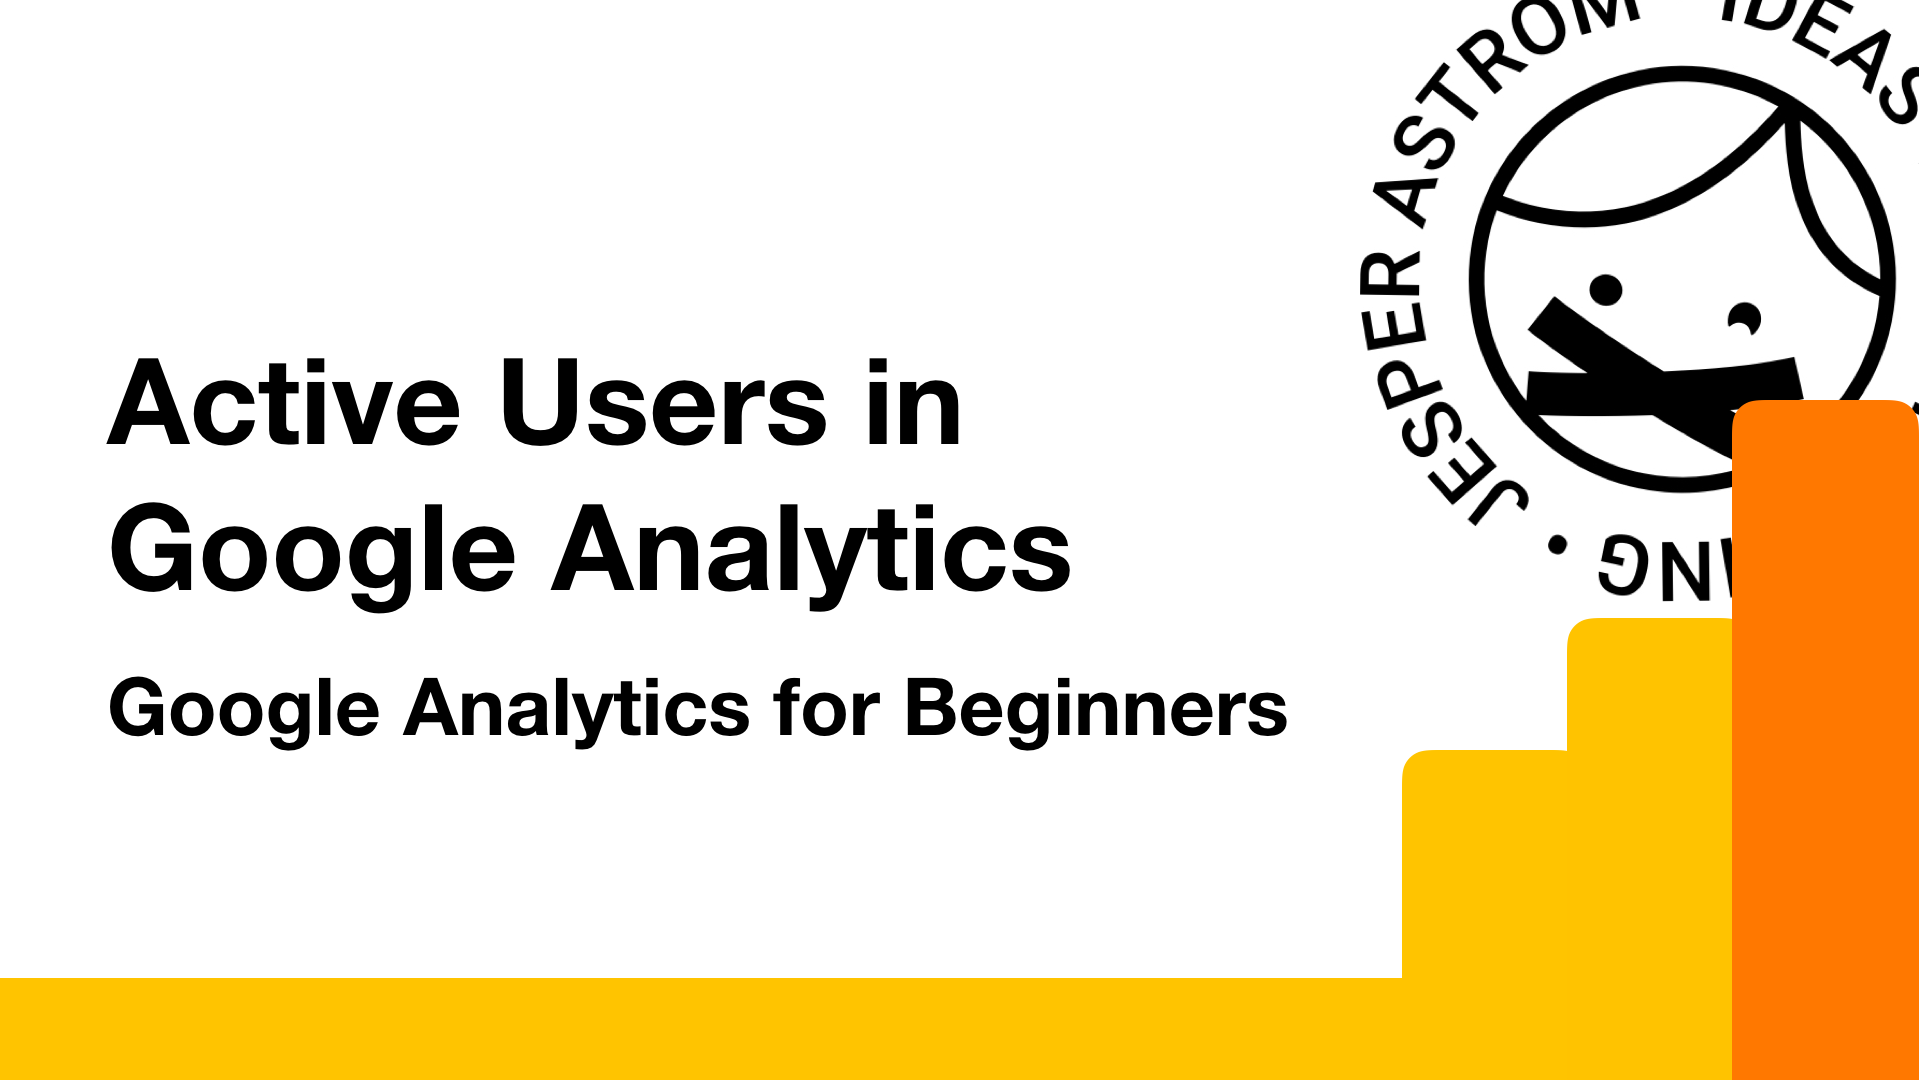 Image of Active users in Google Analytics